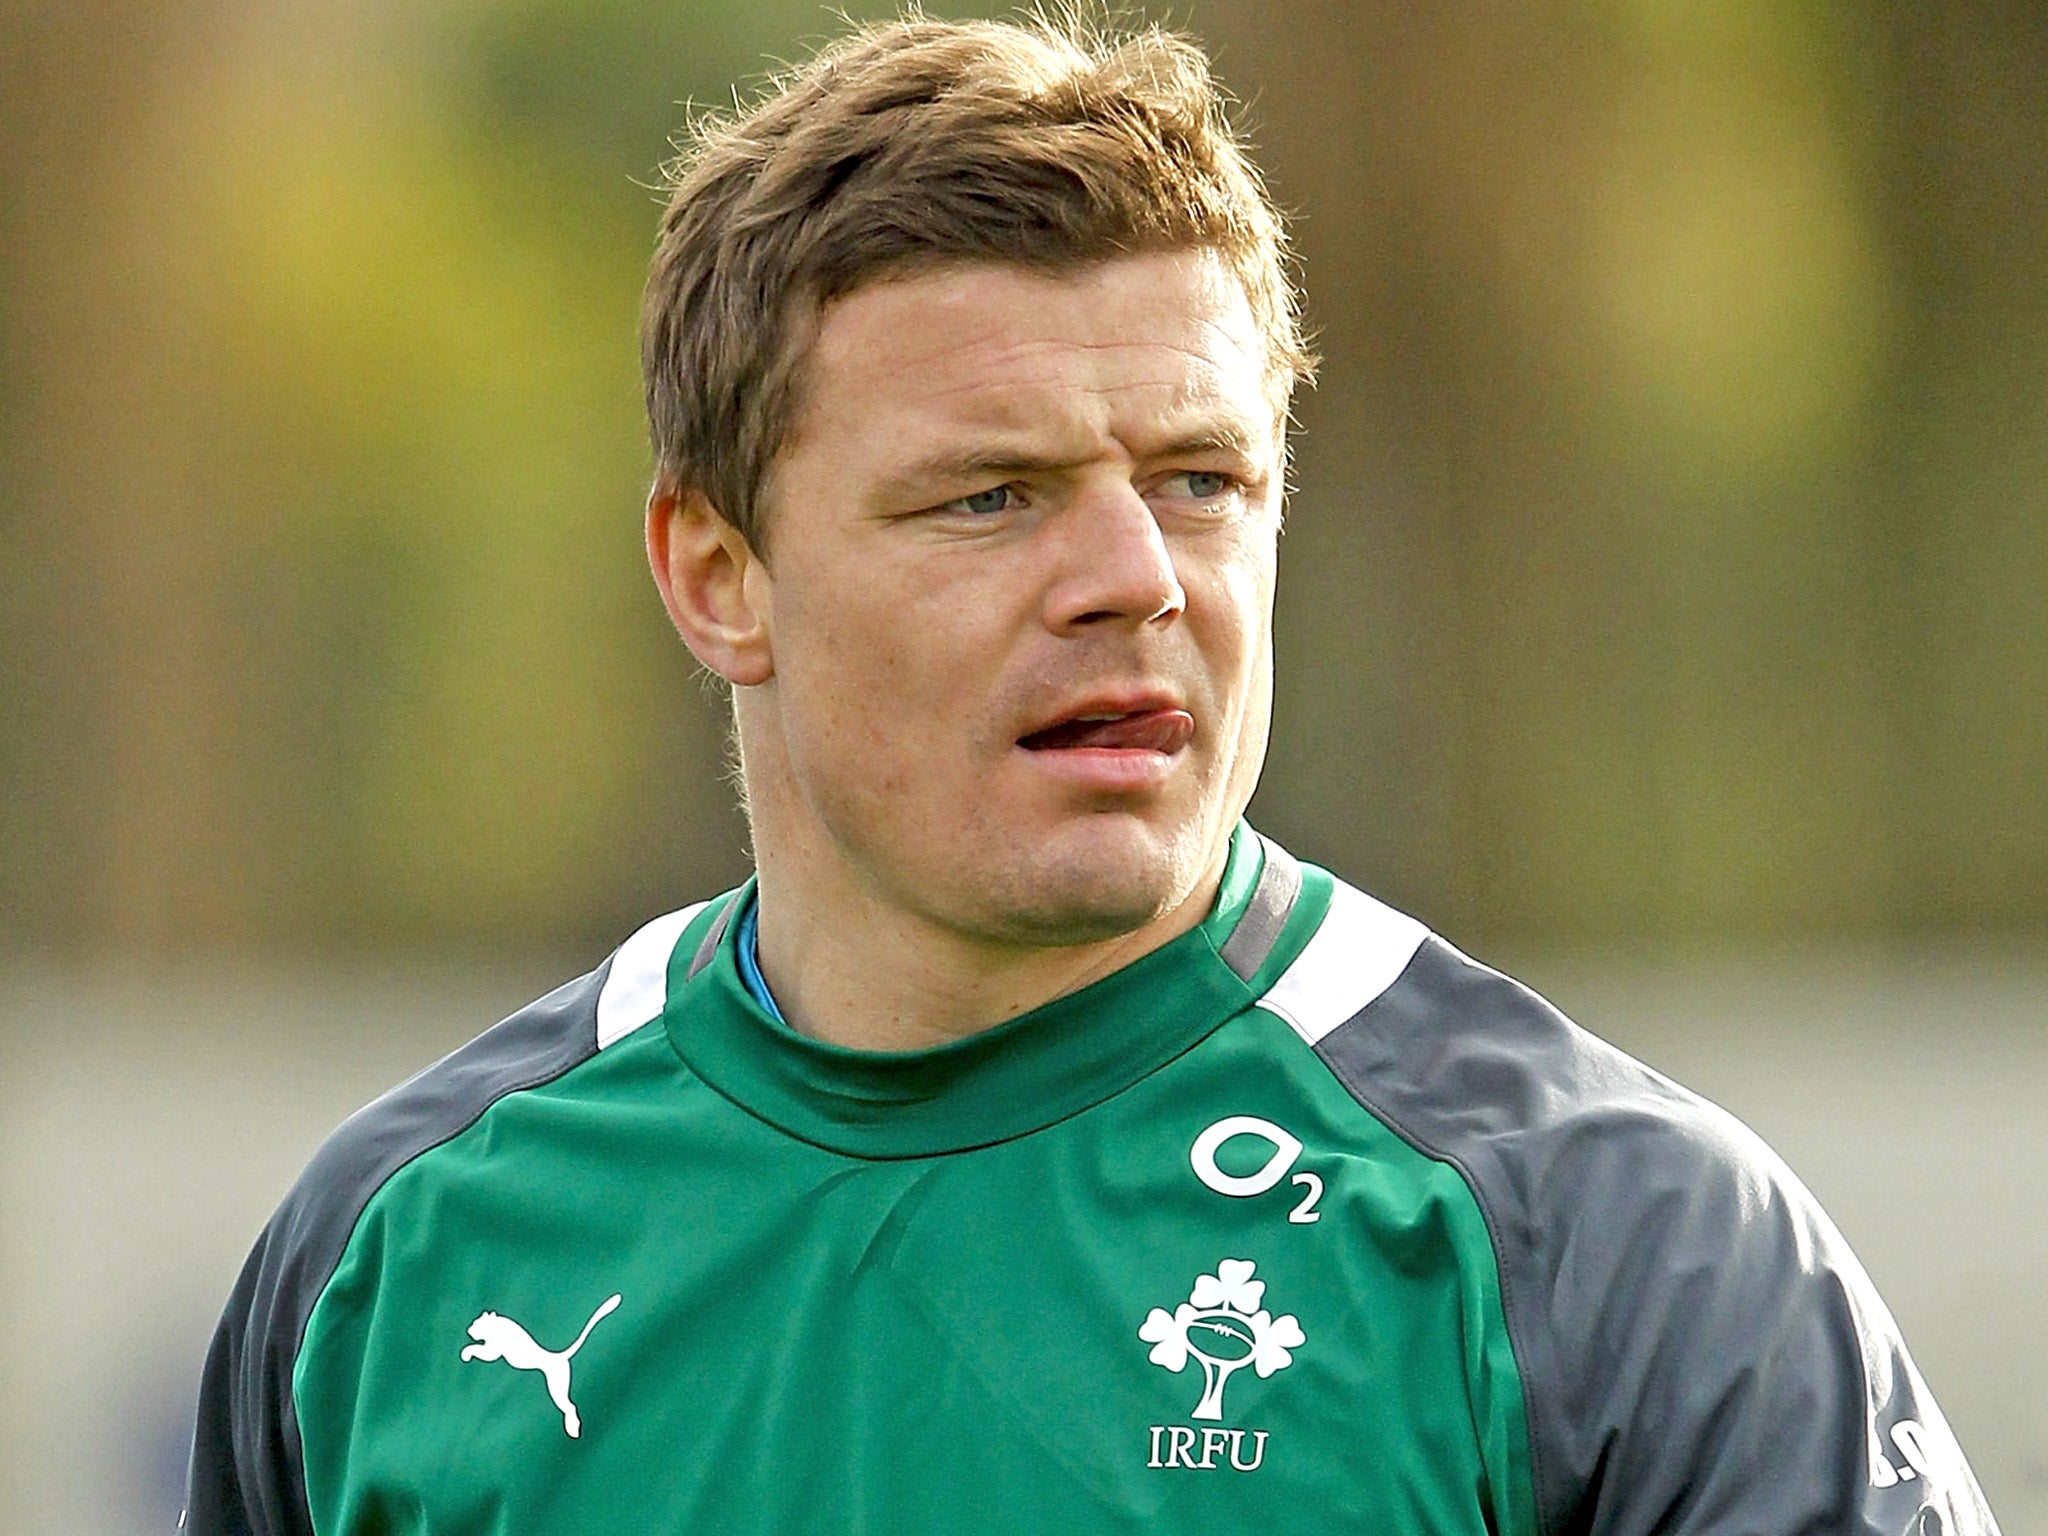 Brian O’Driscoll has been called a ‘world leader’ by England’s Ben Youngs